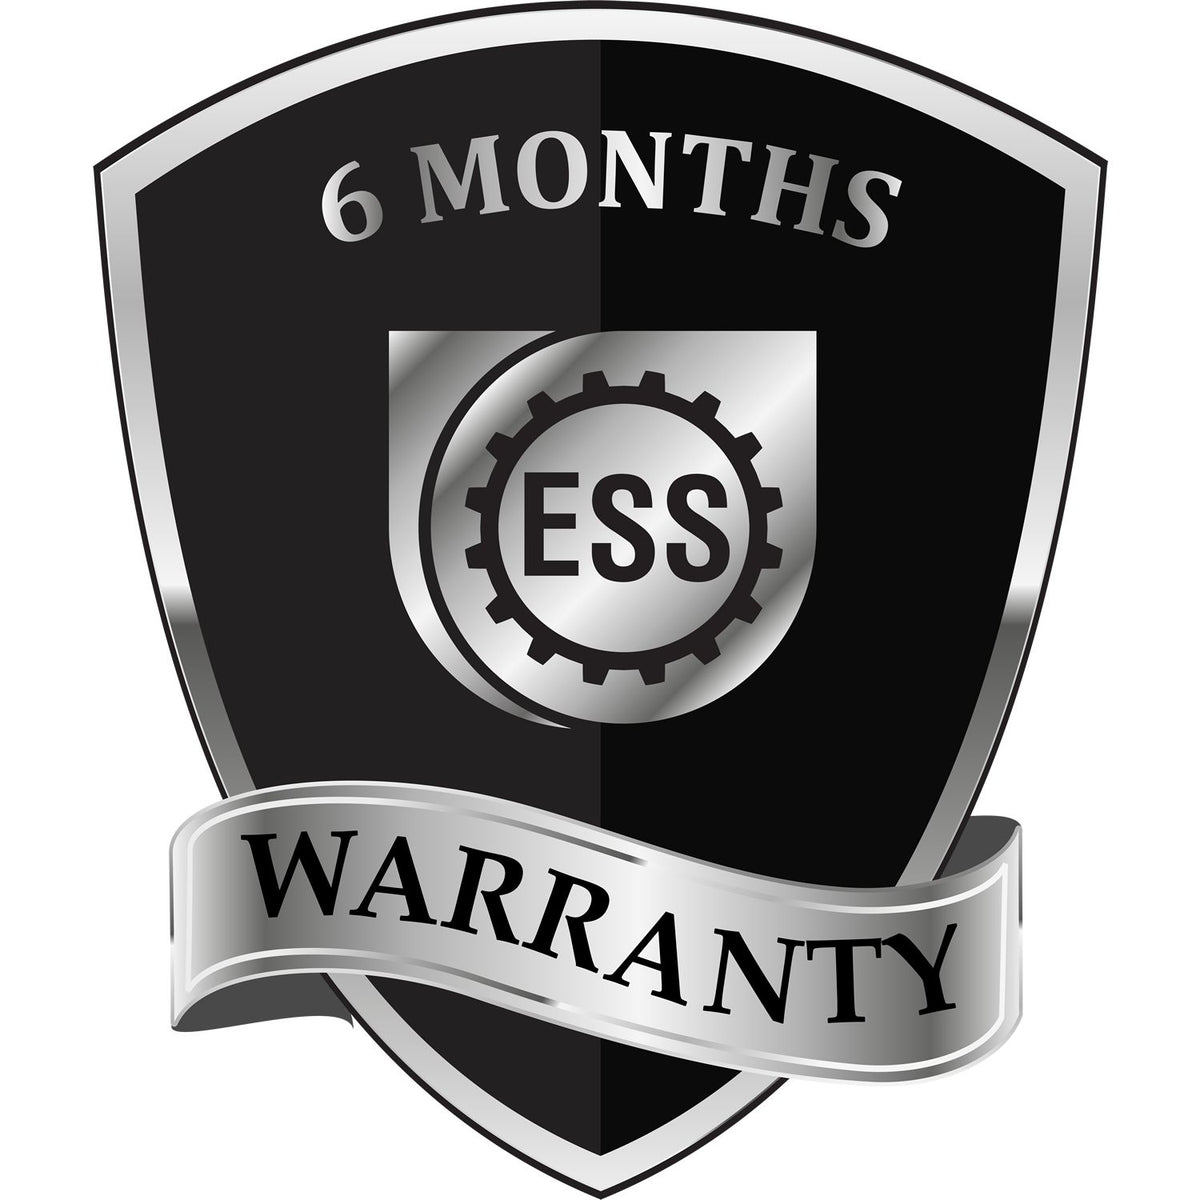 A badge or emblem showing a warranty icon for the Self-Inking Kentucky PE Stamp